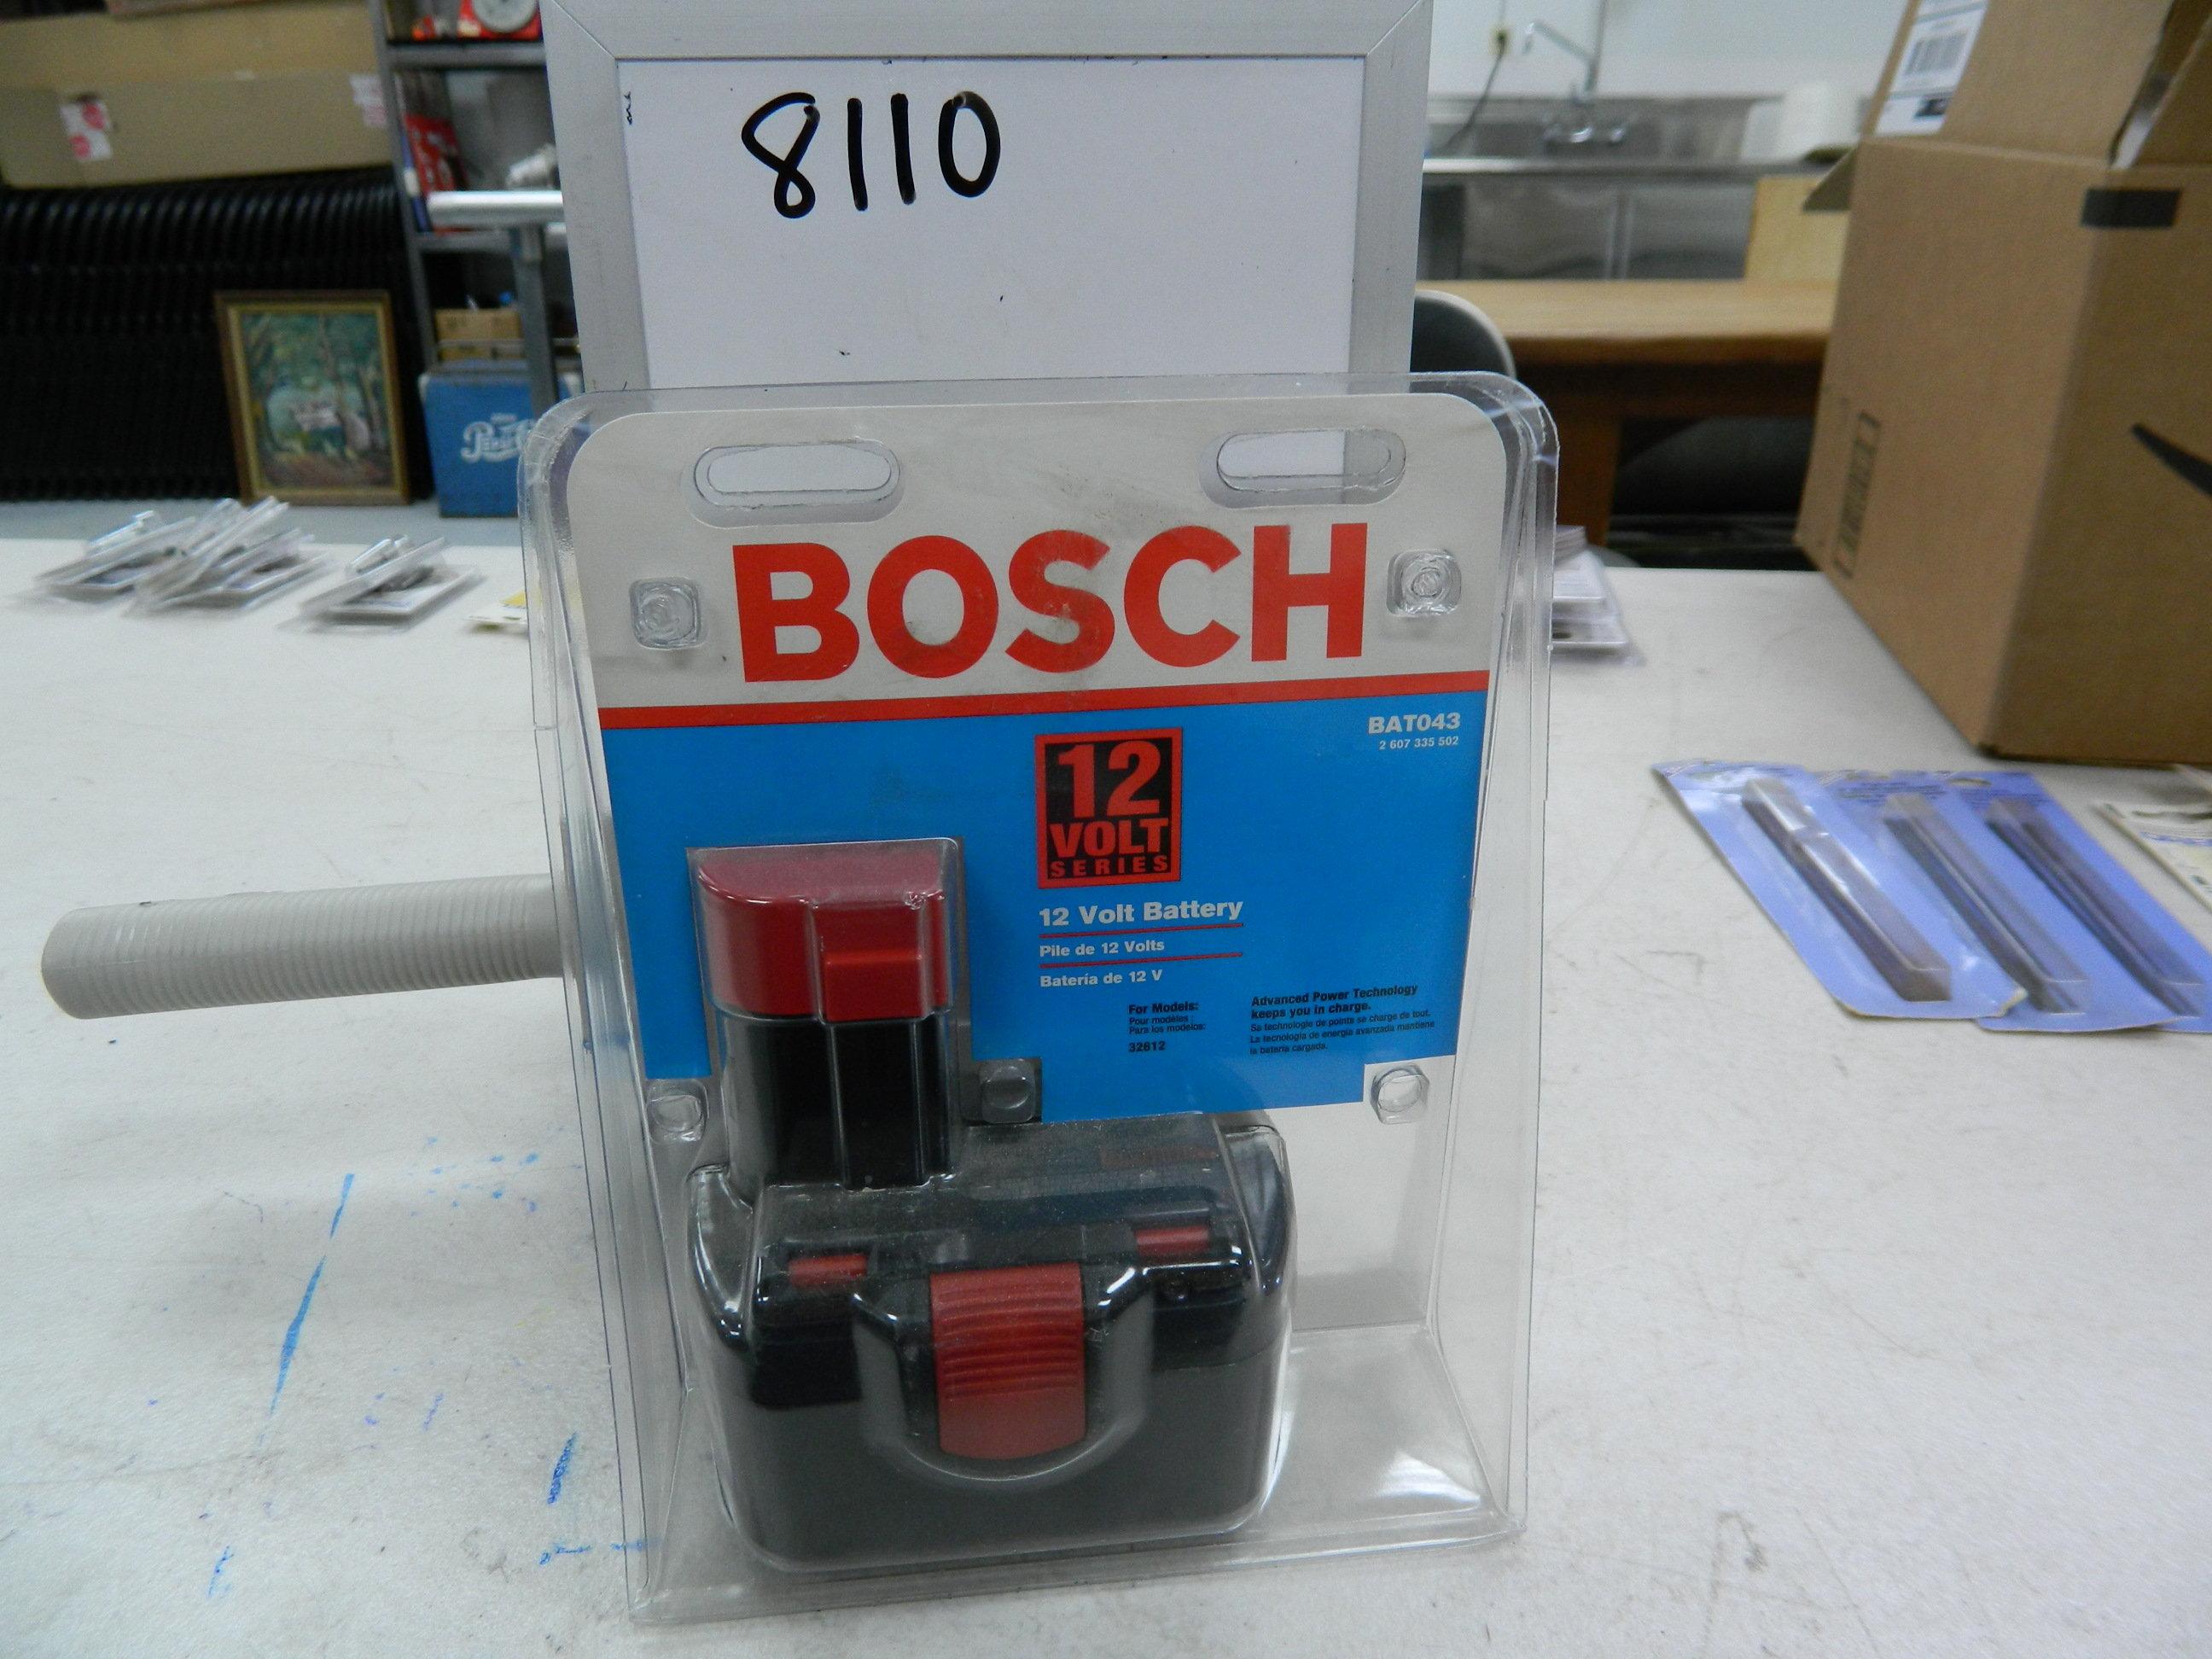 Bosch ABT043 12 volt Battery for Power Tools, NEW IN Package